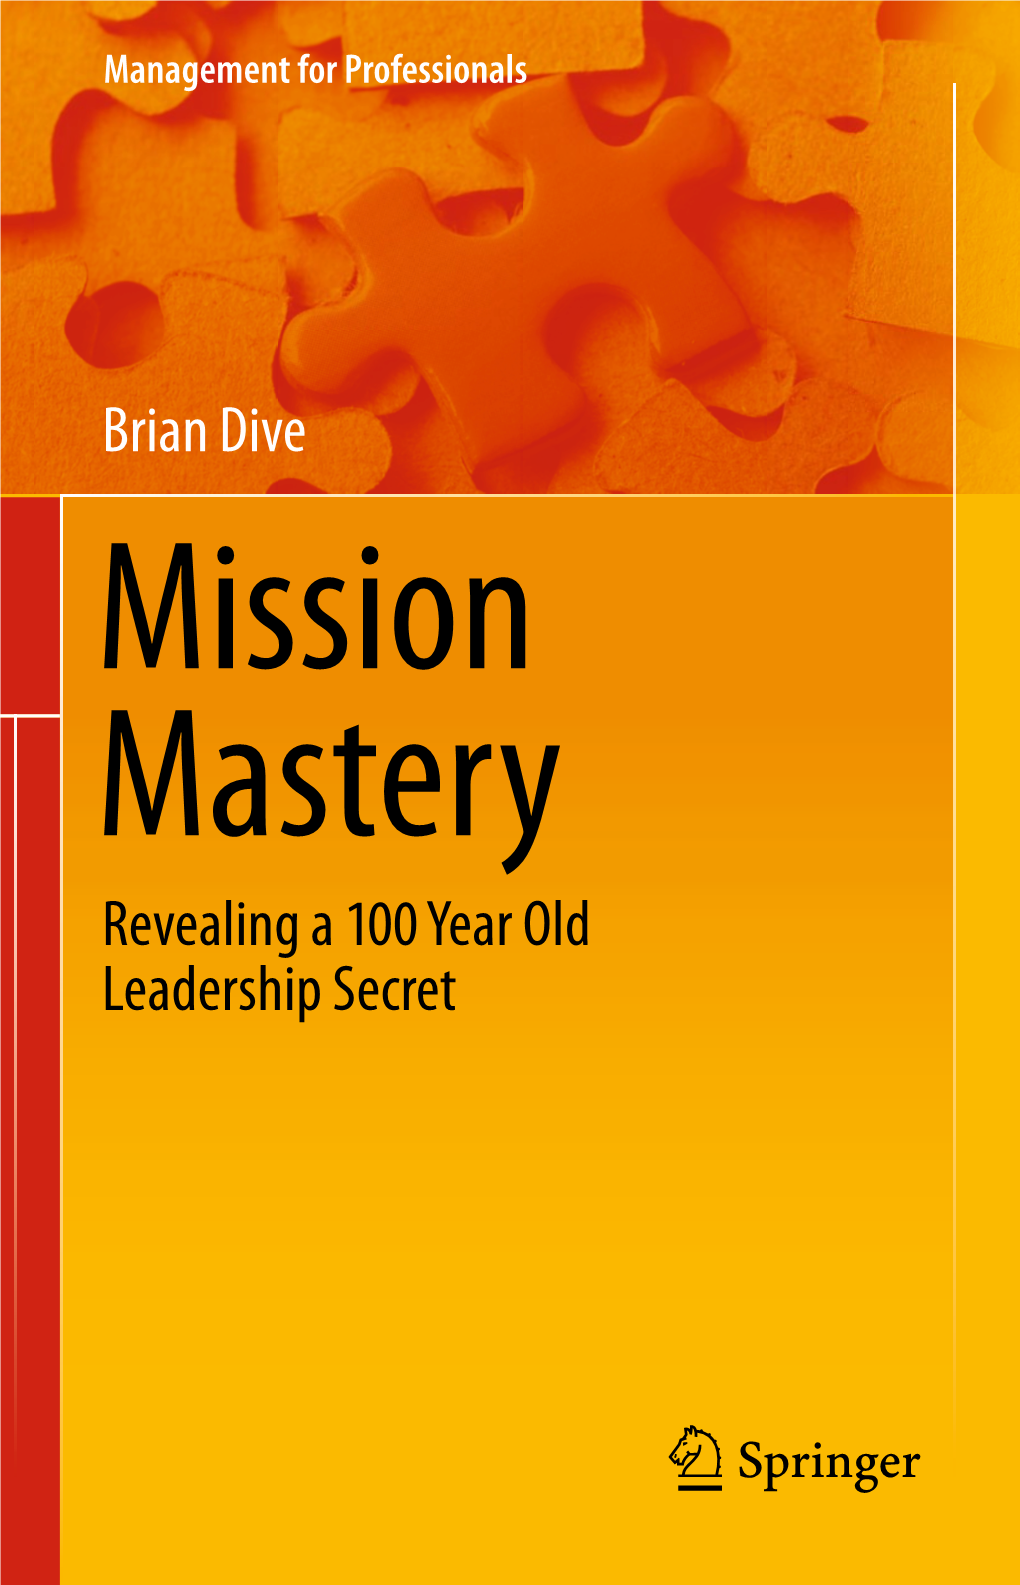 Brian Dive Revealing a 100 Year Old Leadership Secret